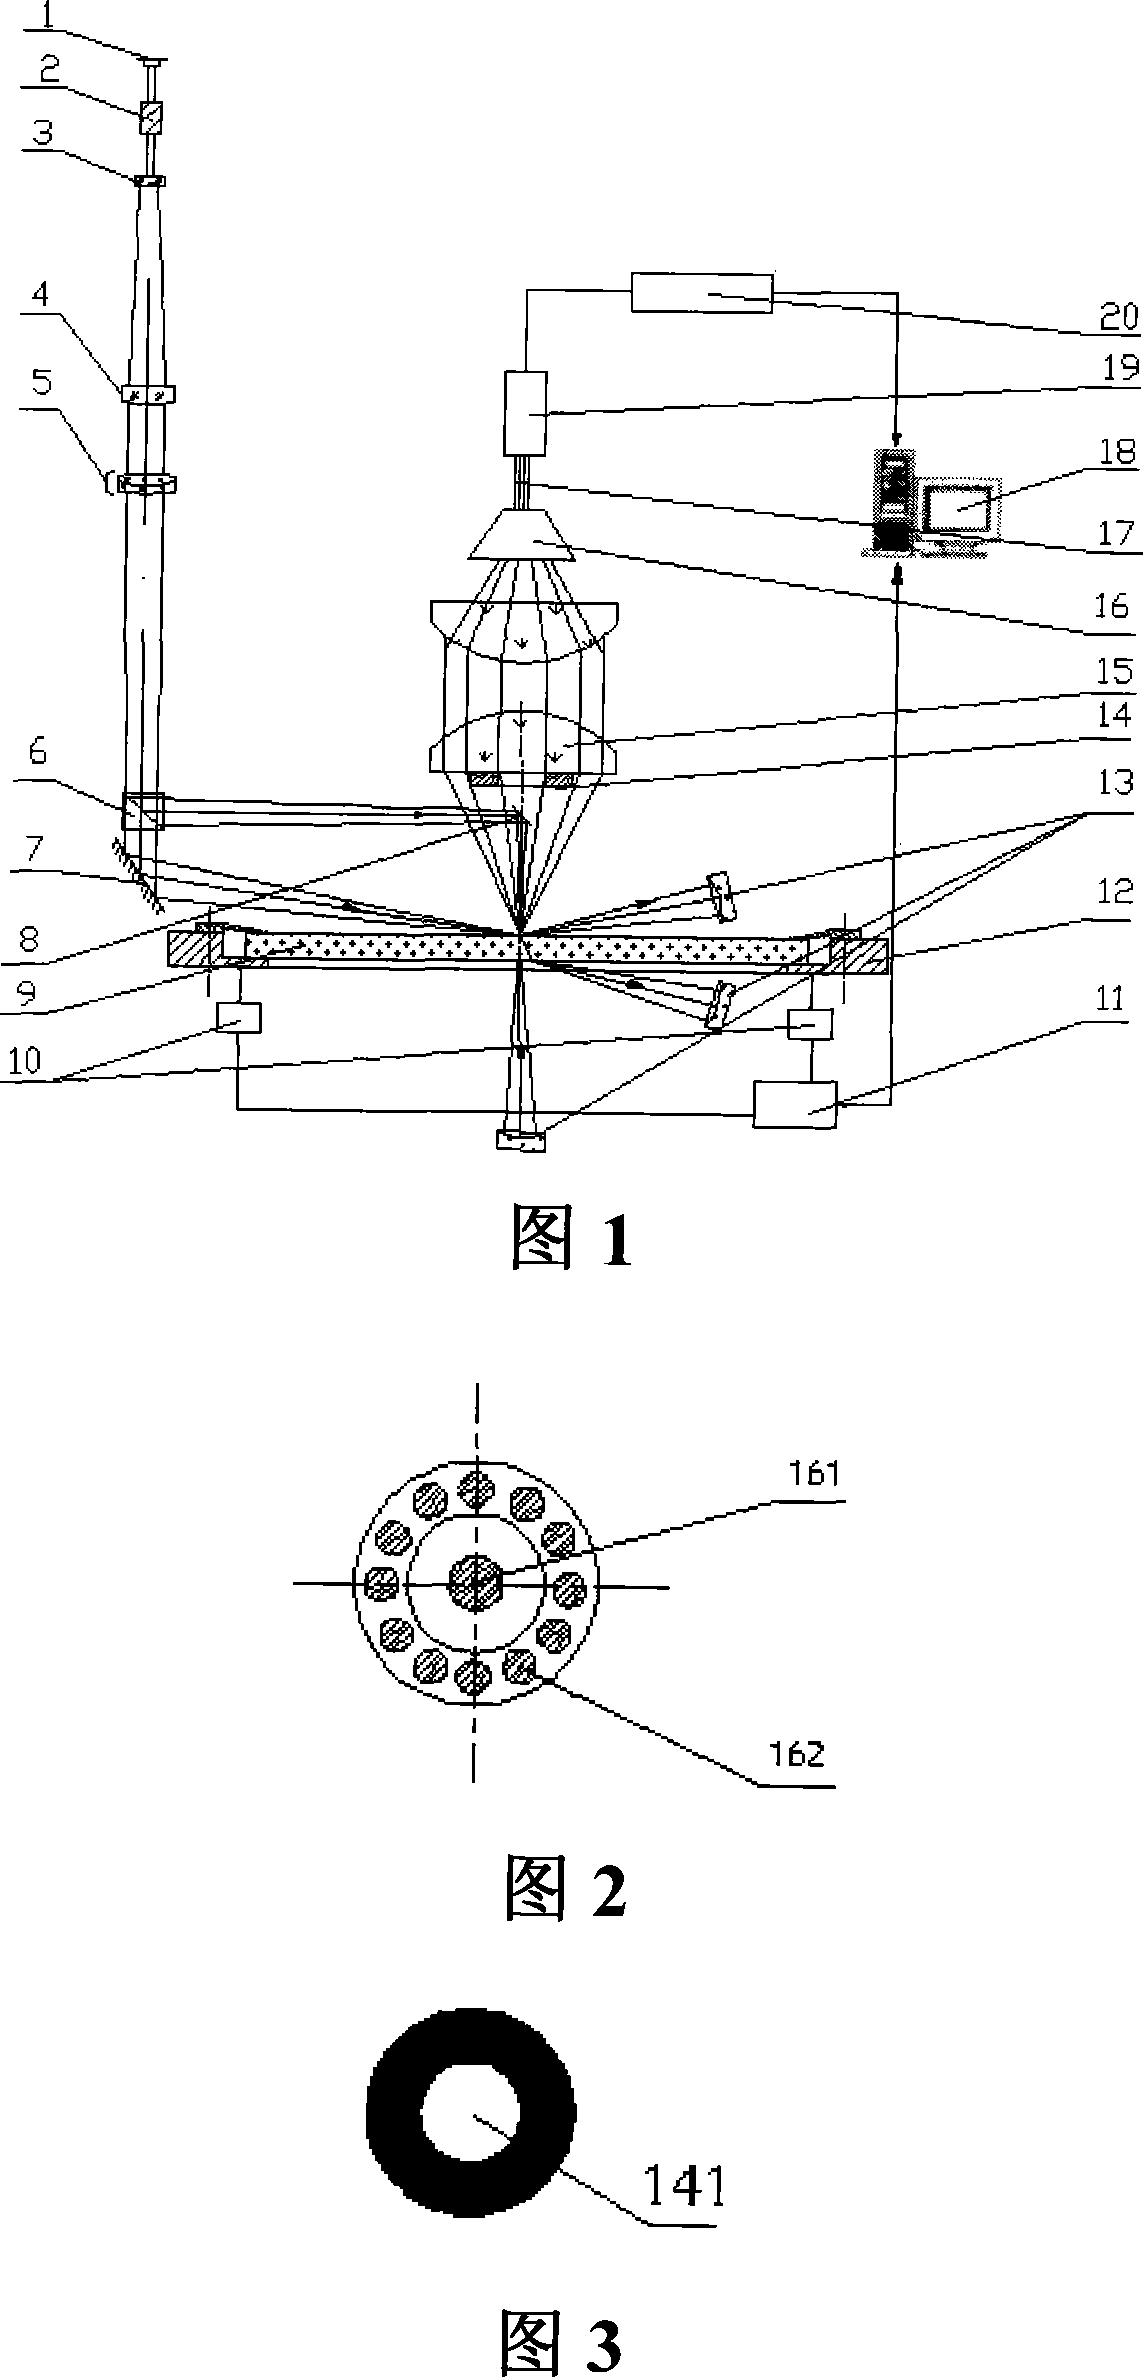 Laser scattering detecting system of optical flat surface blemishes